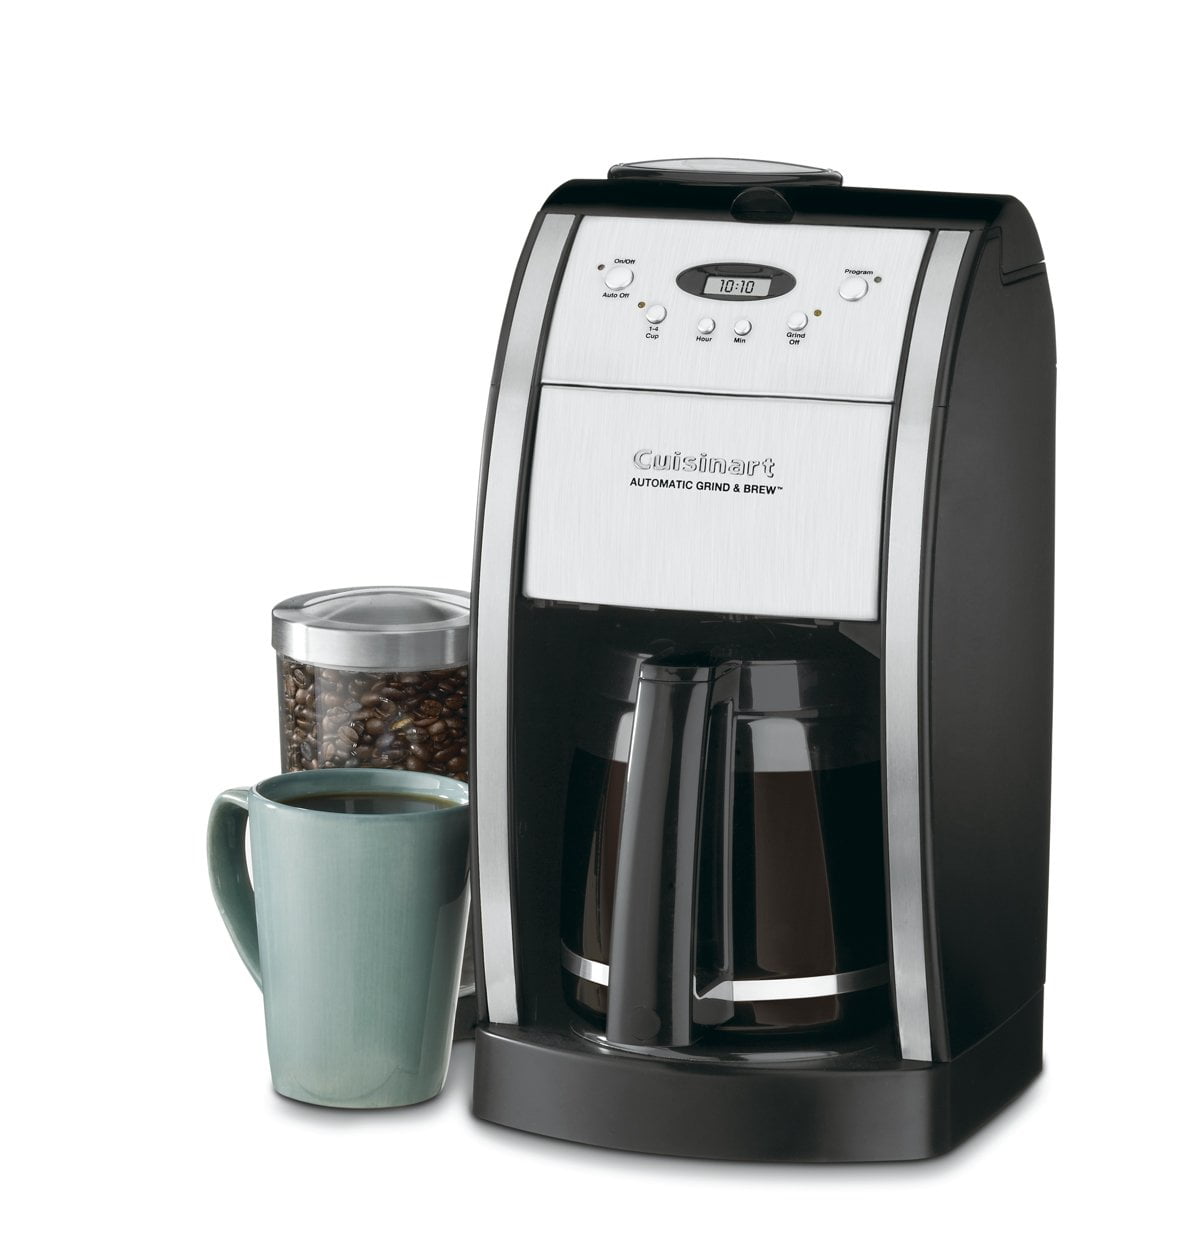 Cuisinart Grind & Brew 12-Cup Automatic Coffeemaker